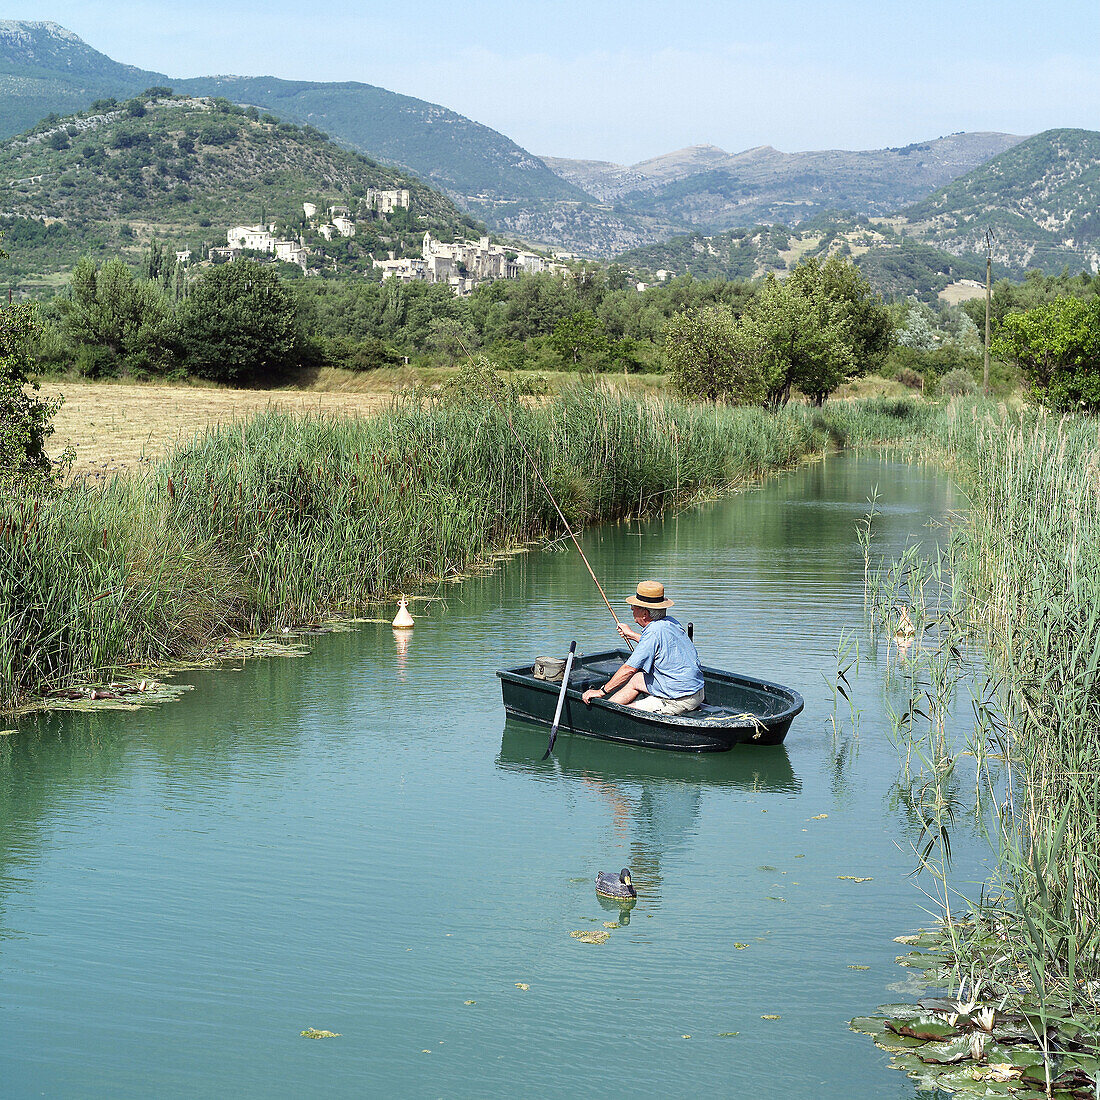 Elderly man fishing from row boat in a river. Drôme, Provence. France.